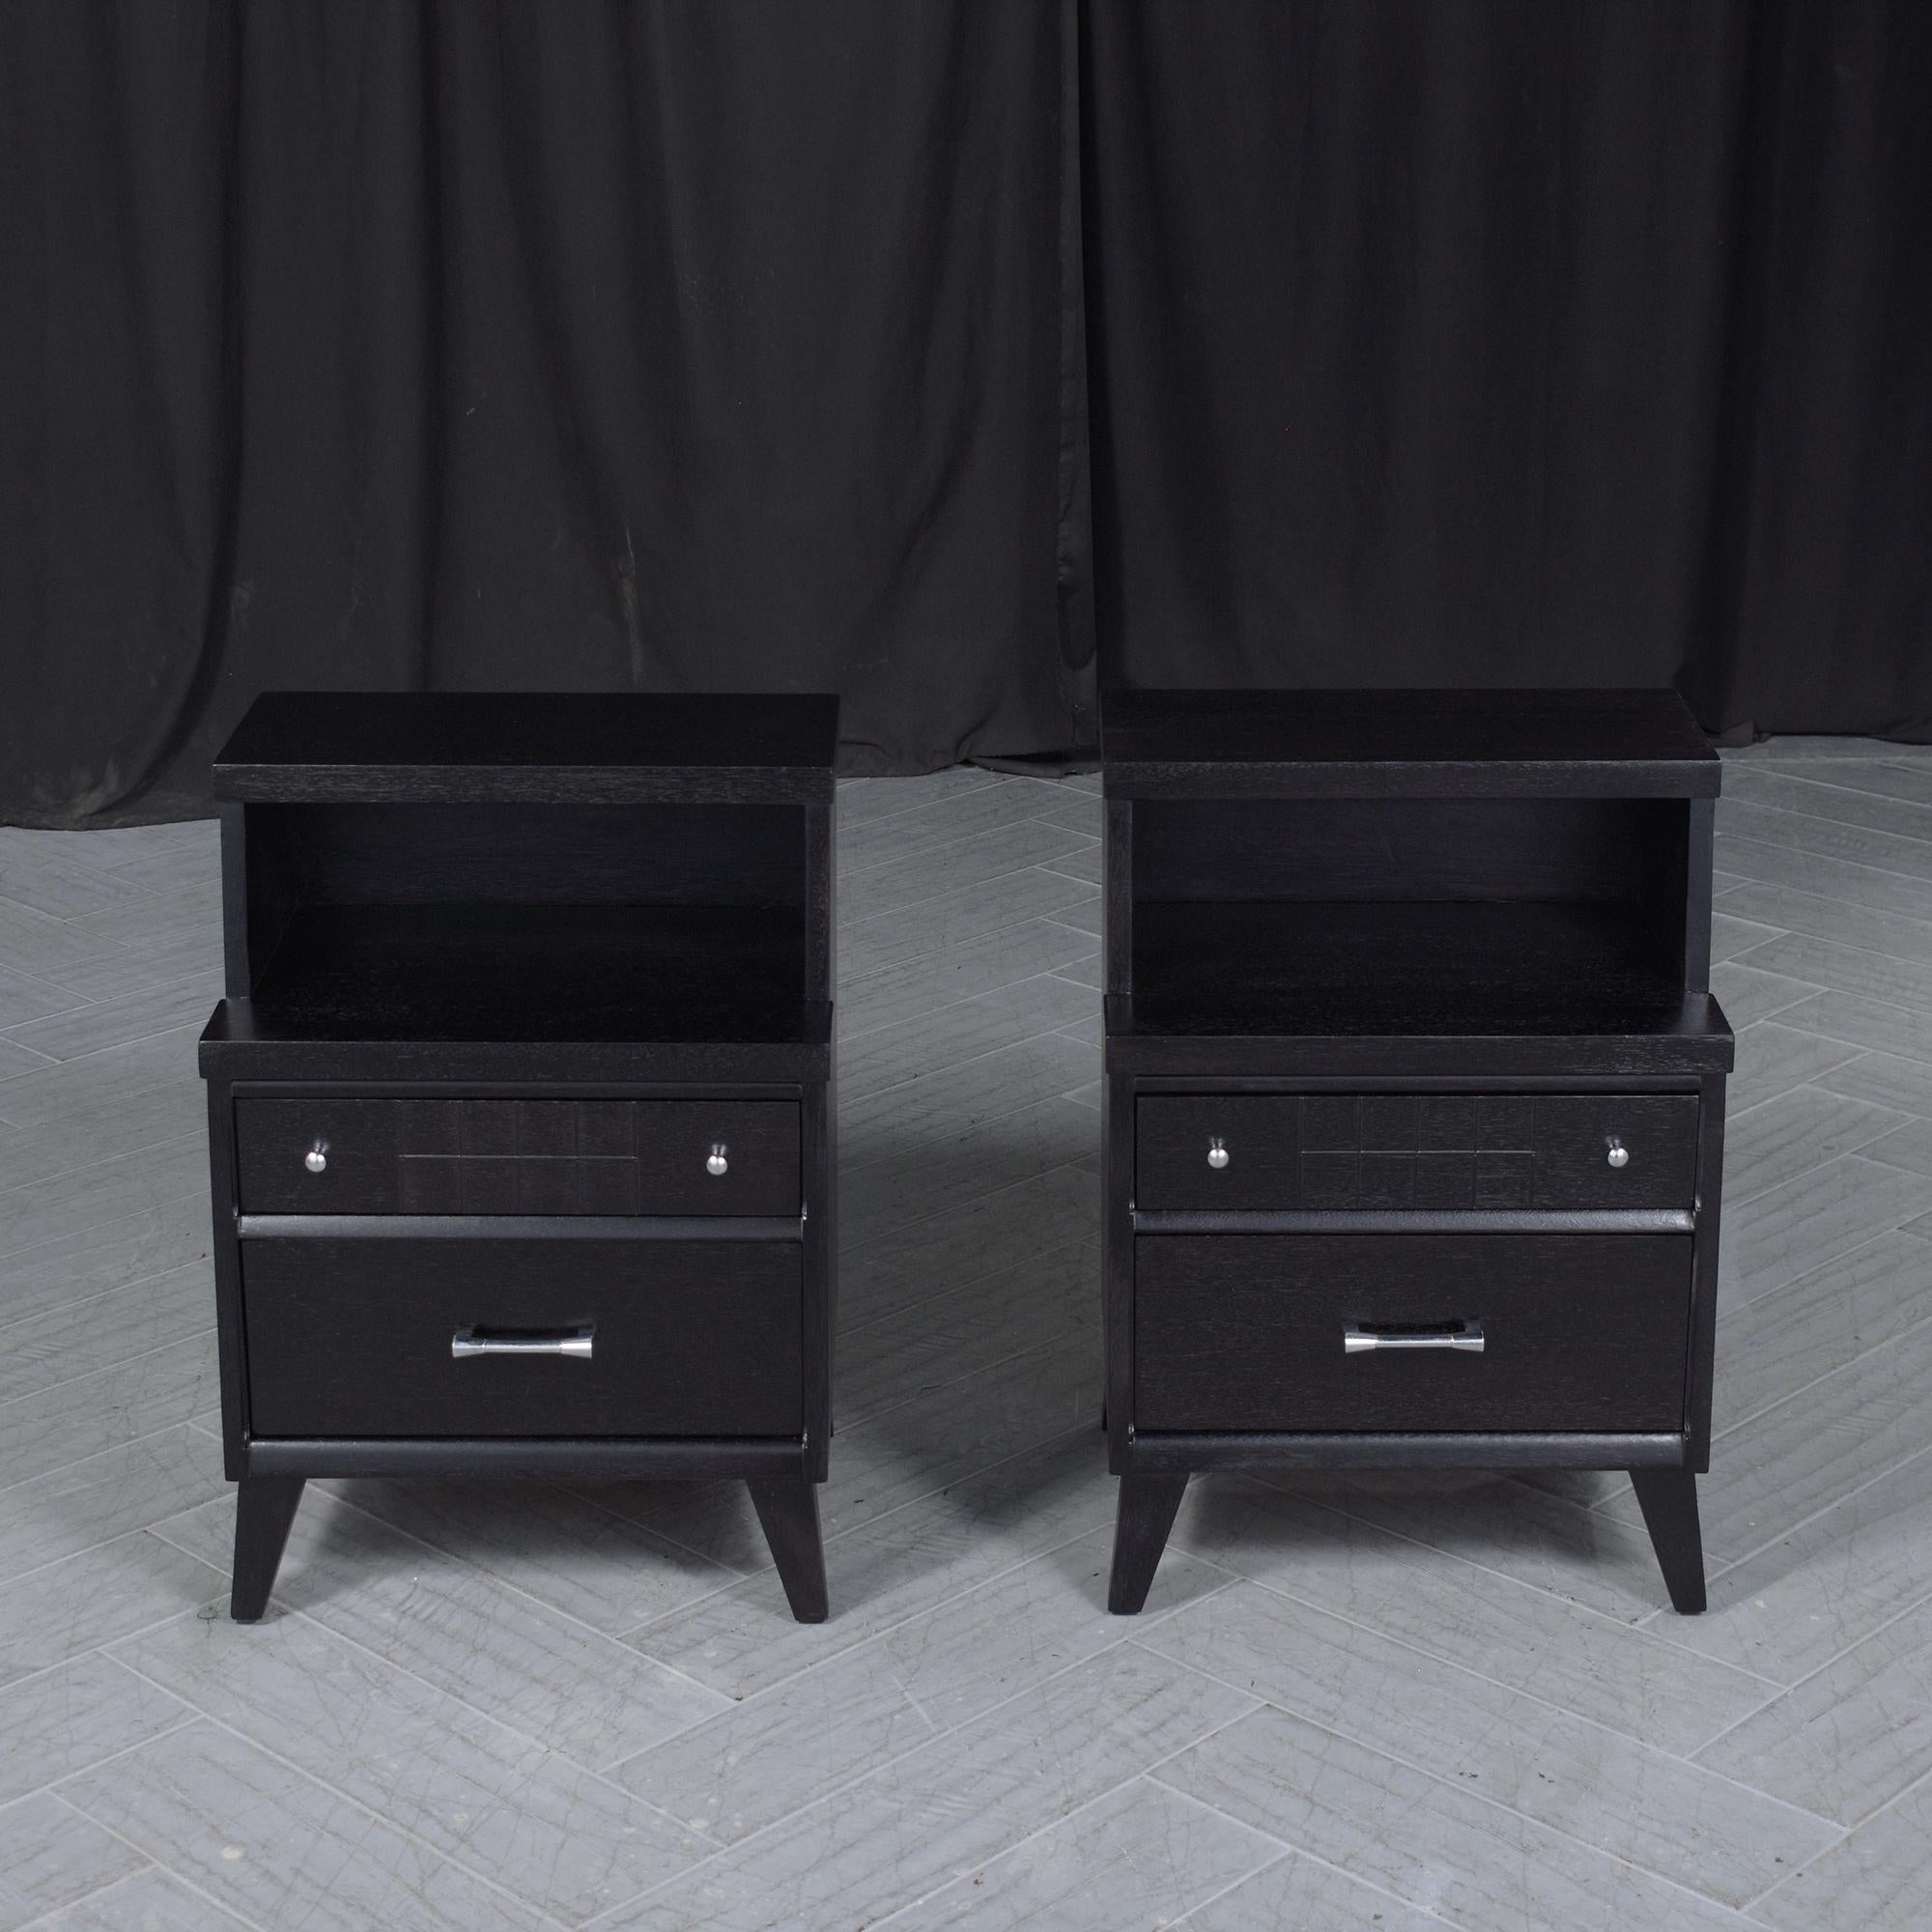 Step into the world of mid-century elegance with our beautifully restored Mid-Century Modern Nightstands. These pieces have been lovingly brought back to their original splendor by our skilled craftsmen, blending vintage charm with modern